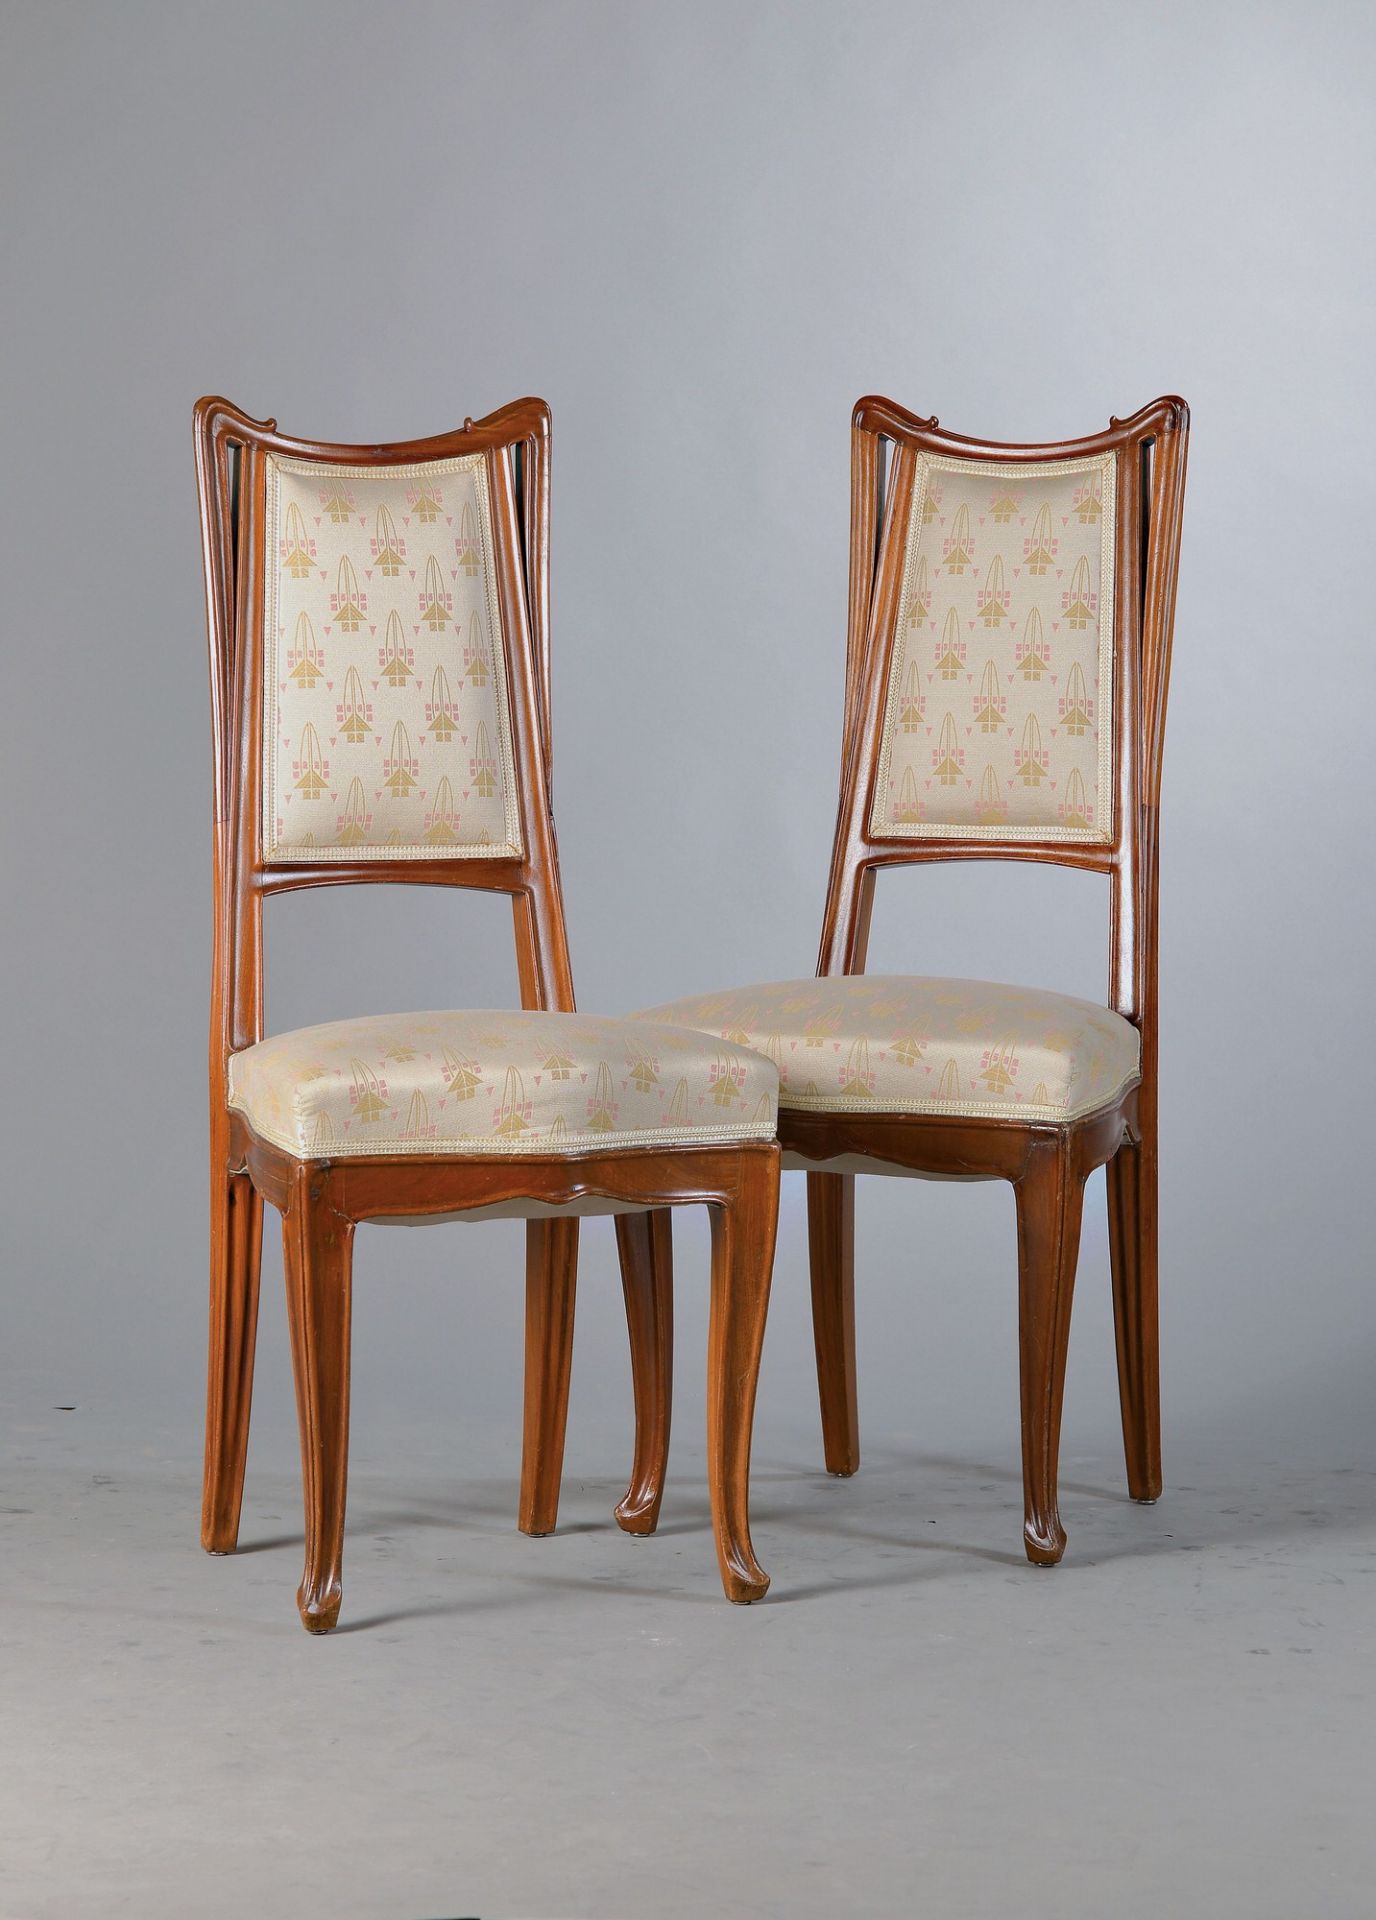 2 chairs, Majorelle, France, around 1900, mahogany, orig. relation, one repaired, H. approx.